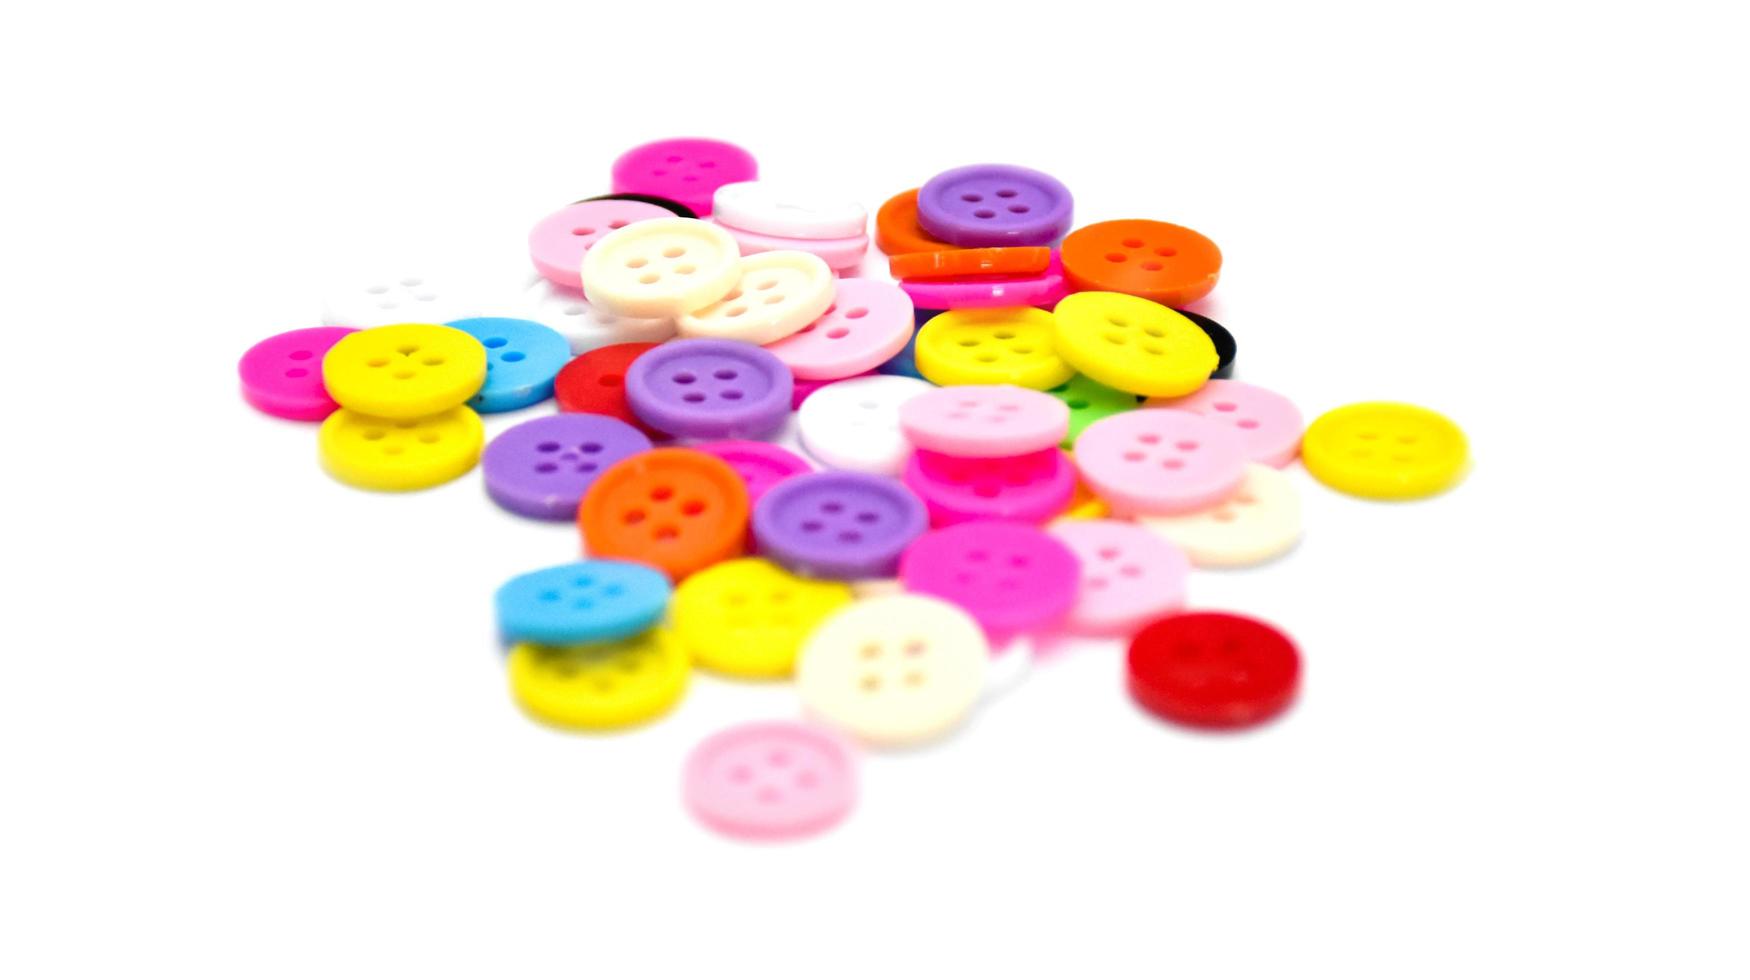 colorful various buttons on white background, soft and selective focus. photo